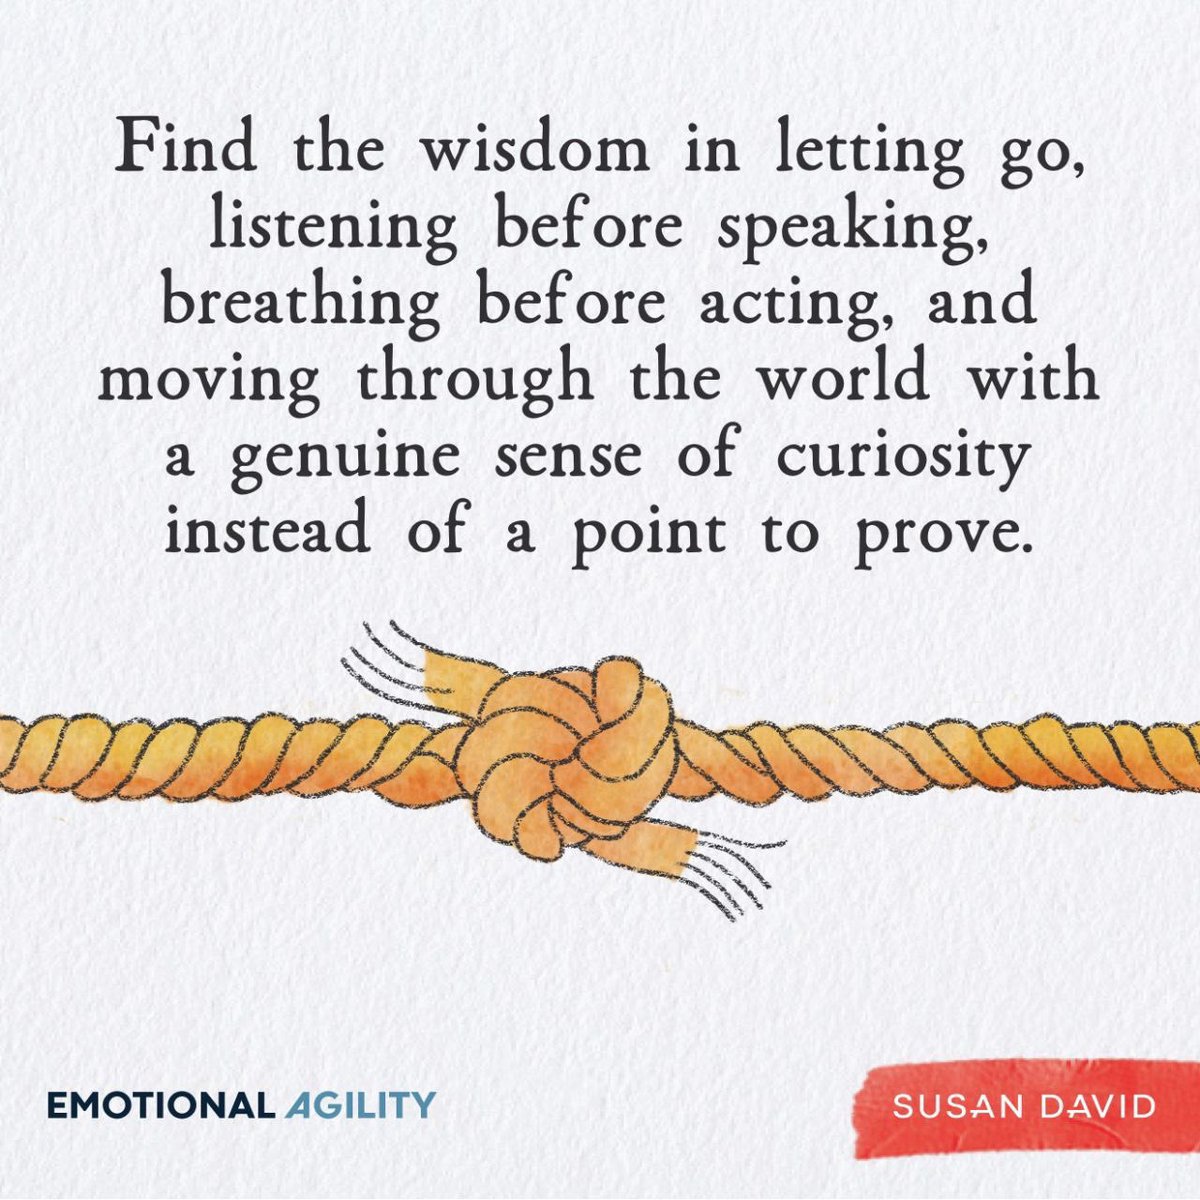 As we start another week I thought I’d share this great advice from @SusanDavid_PhD 

#EmotionalAgility #EverydayLeadership #BeCurious